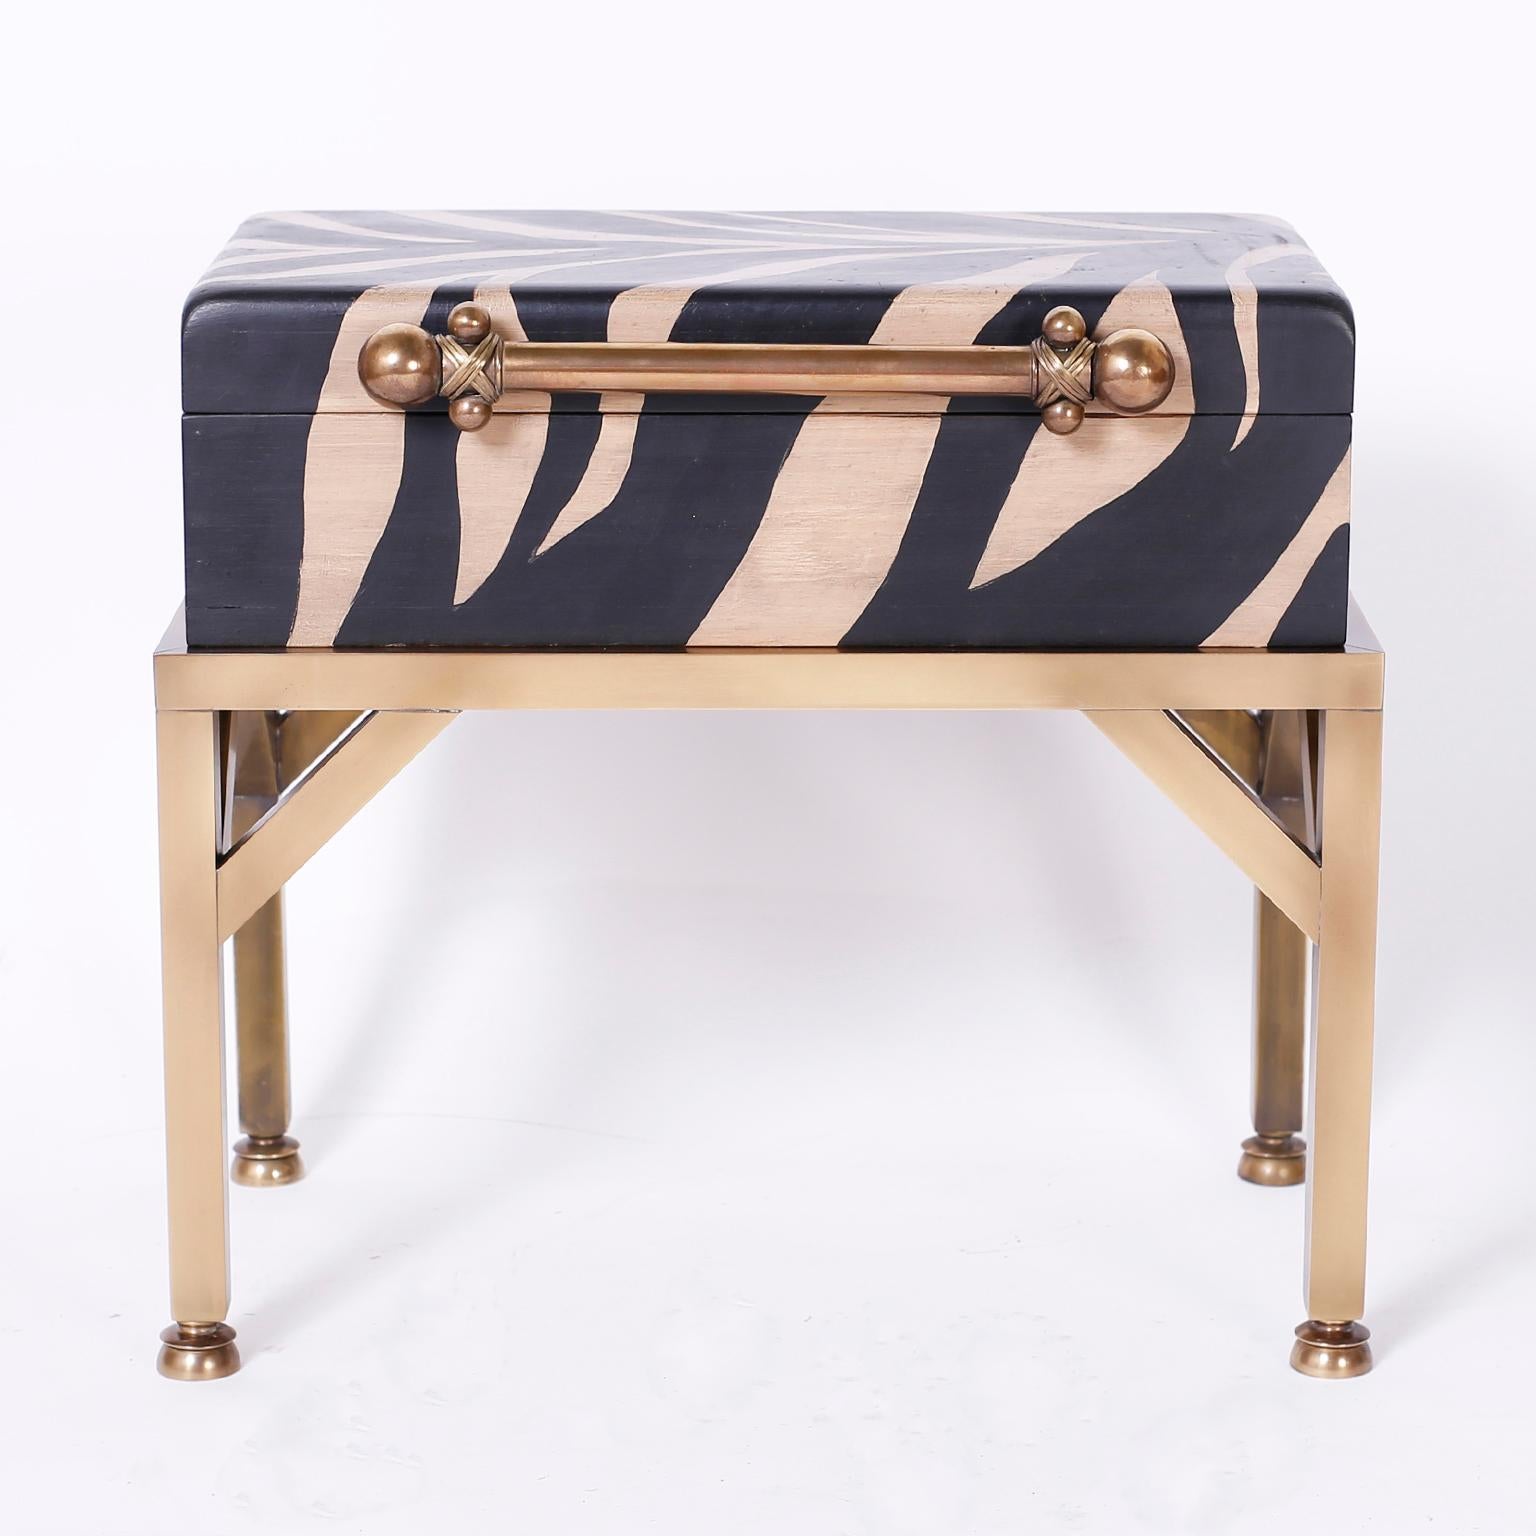 Midcentury lidded wood box decorated in faux zebra paint with a decorative handle and set on a burnished brass stand.